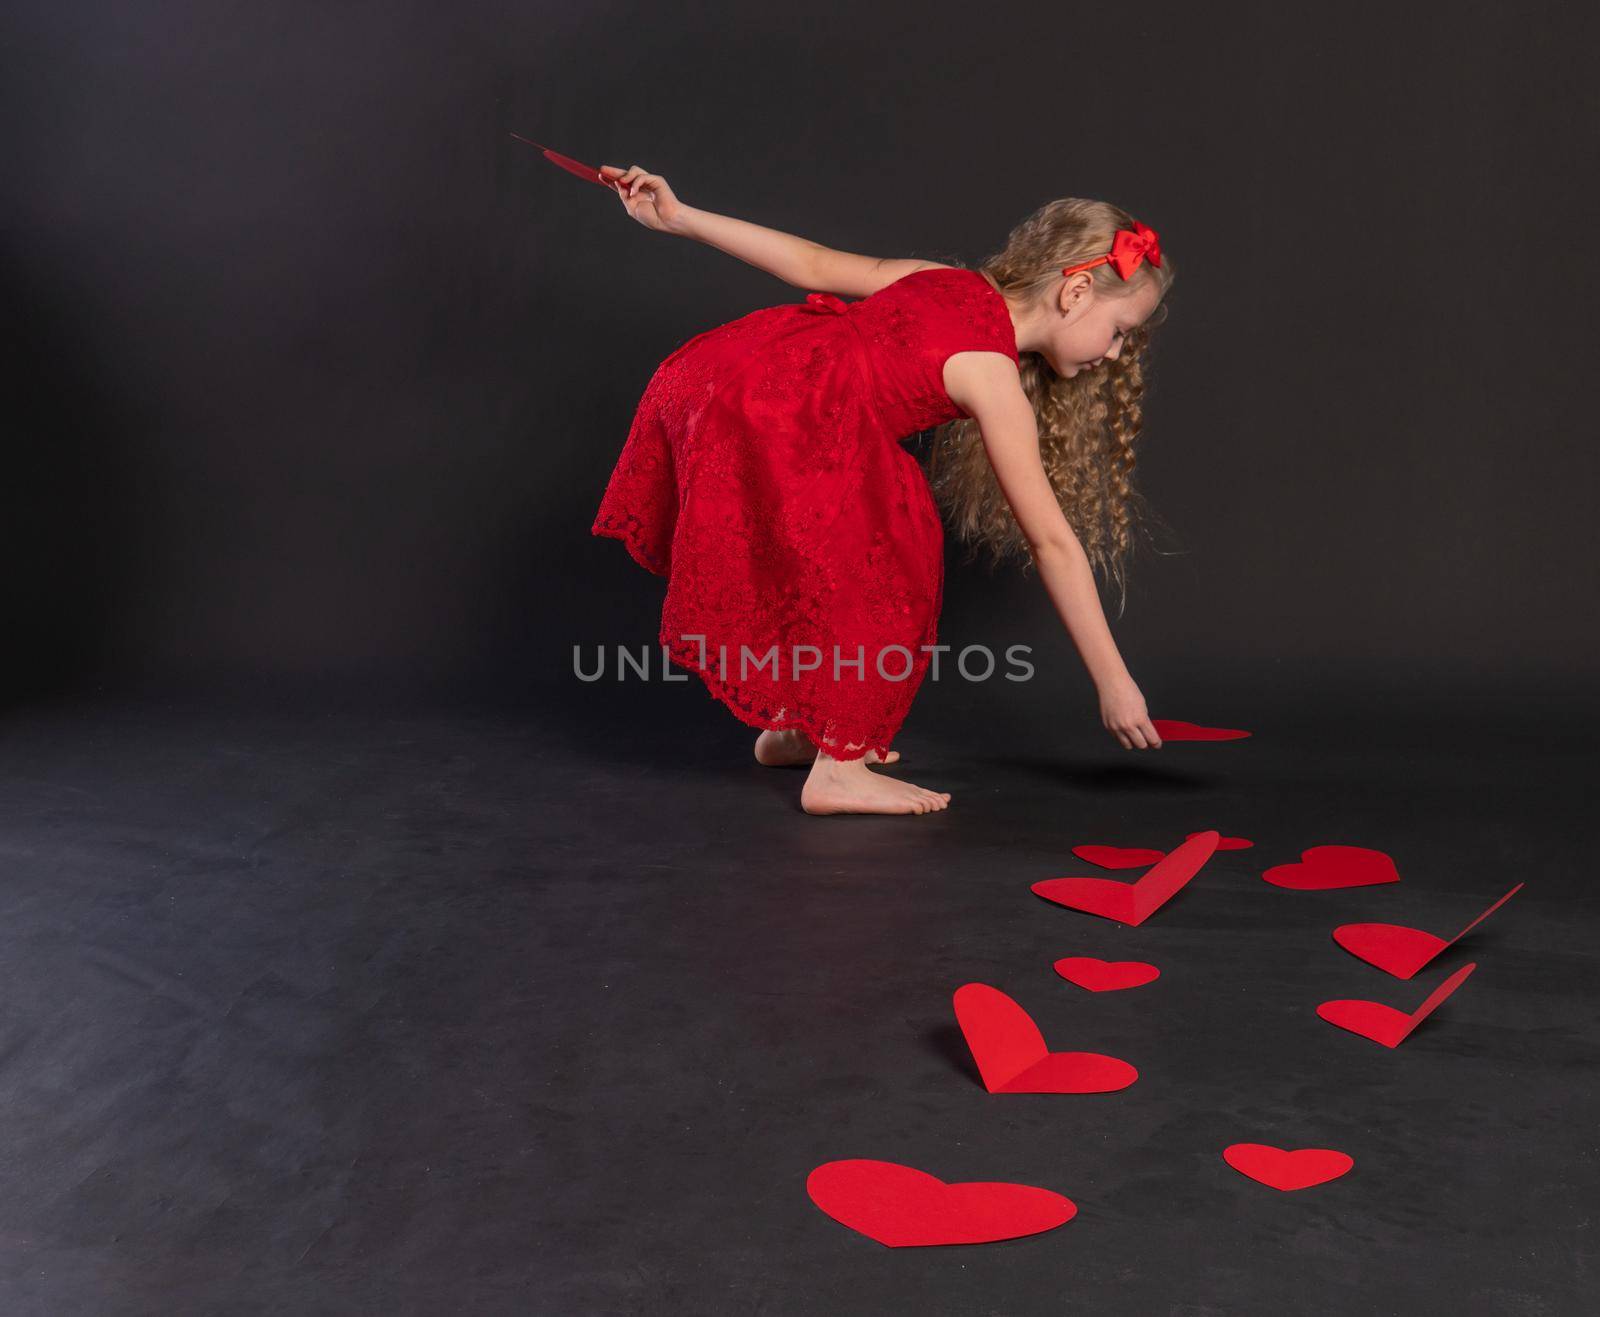 paper hearts love red, heart valentine's day, on the floor hearts romance wedding. art. emotions formula of love, joy in a red dress girl, barefoot